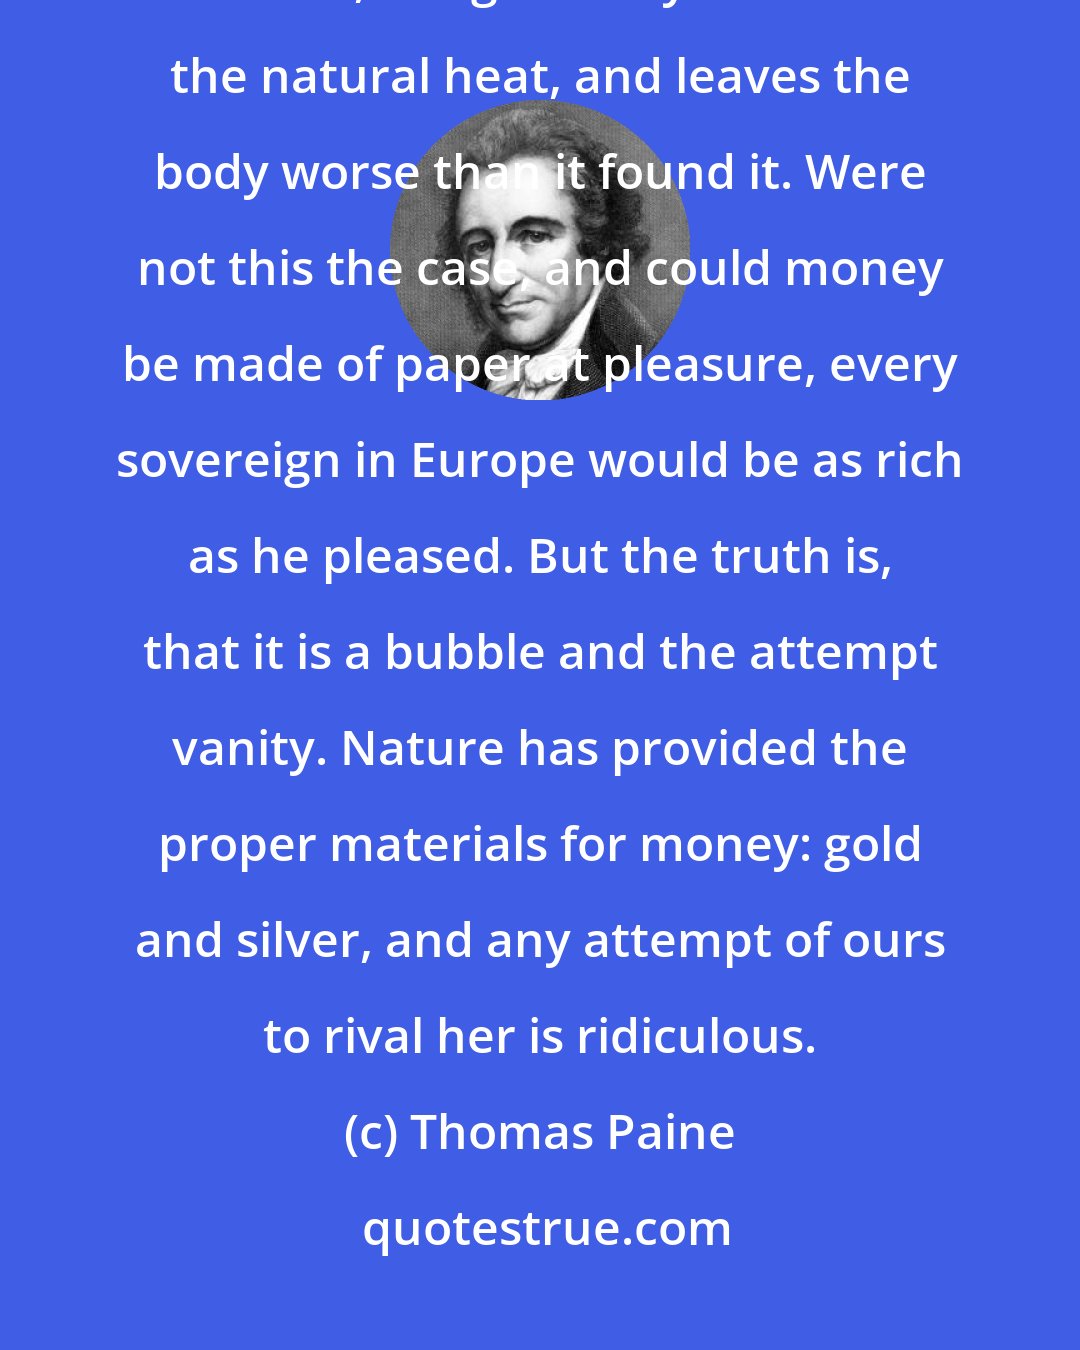 Thomas Paine: Paper money is like dram-drinking, it relieves for a moment by deceitful sensation, but gradually diminishes the natural heat, and leaves the body worse than it found it. Were not this the case, and could money be made of paper at pleasure, every sovereign in Europe would be as rich as he pleased. But the truth is, that it is a bubble and the attempt vanity. Nature has provided the proper materials for money: gold and silver, and any attempt of ours to rival her is ridiculous.